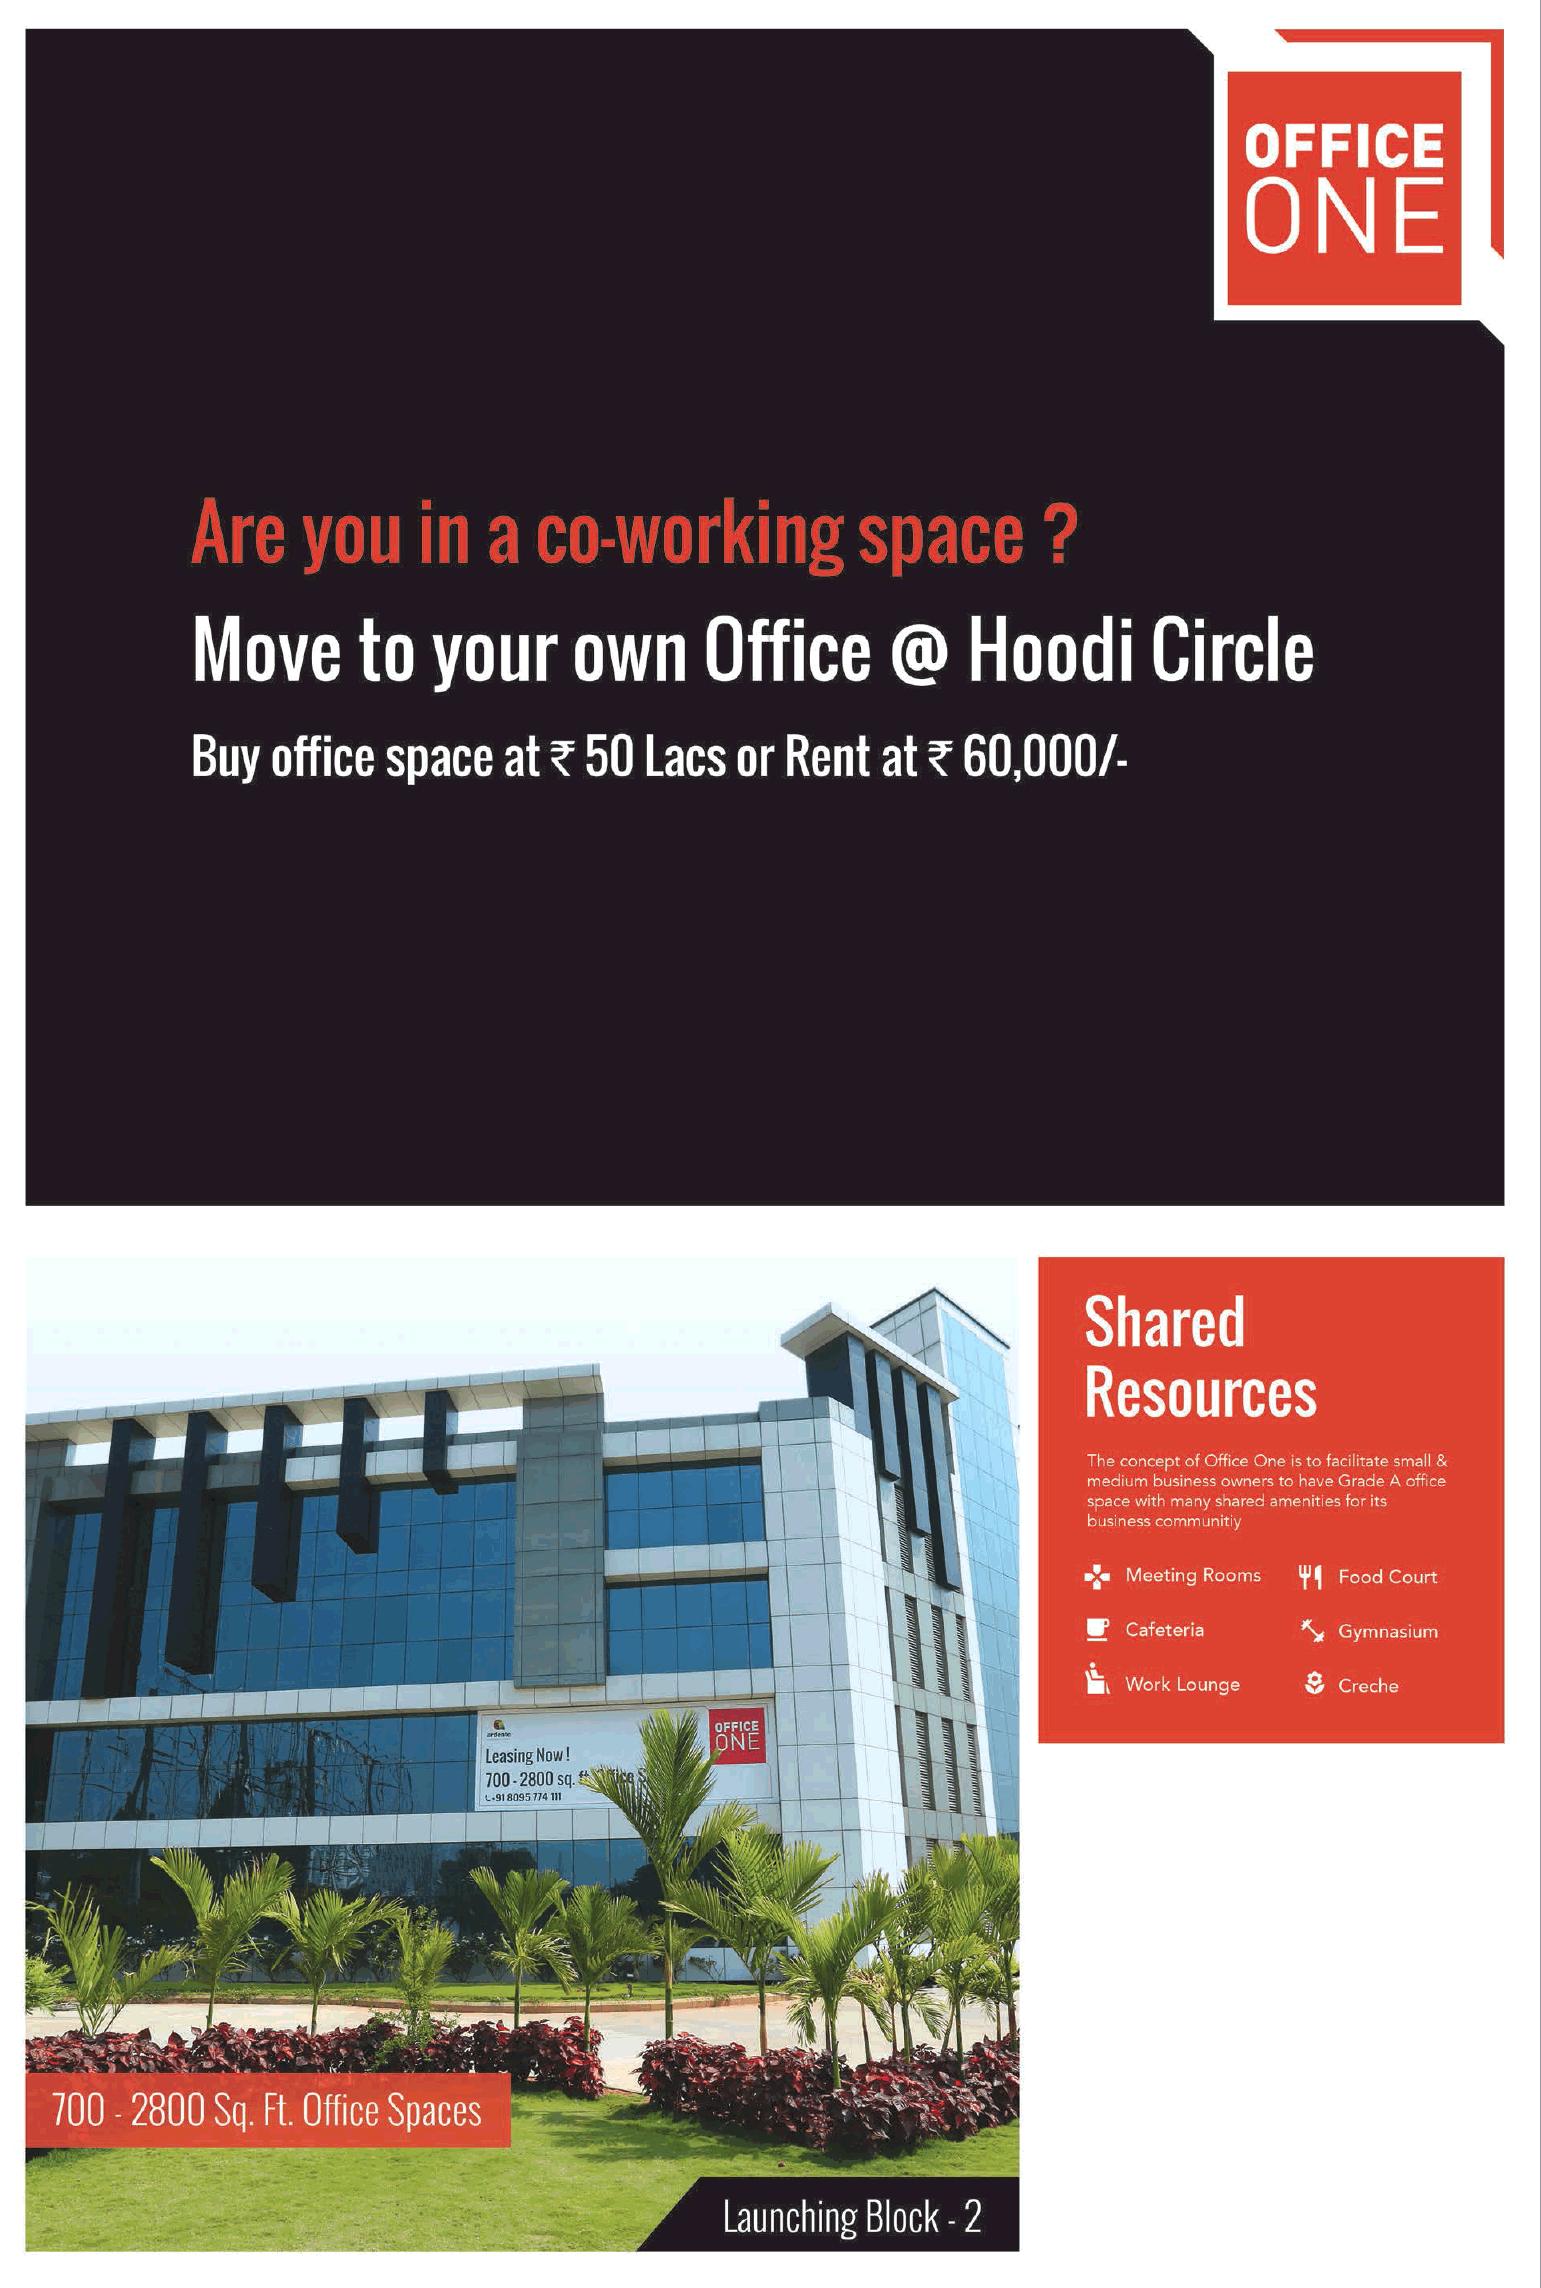 Buy office space @ Rs. 50 Lacs or rent @ Rs. 60000 at Ardente Office One in Bangalore Update